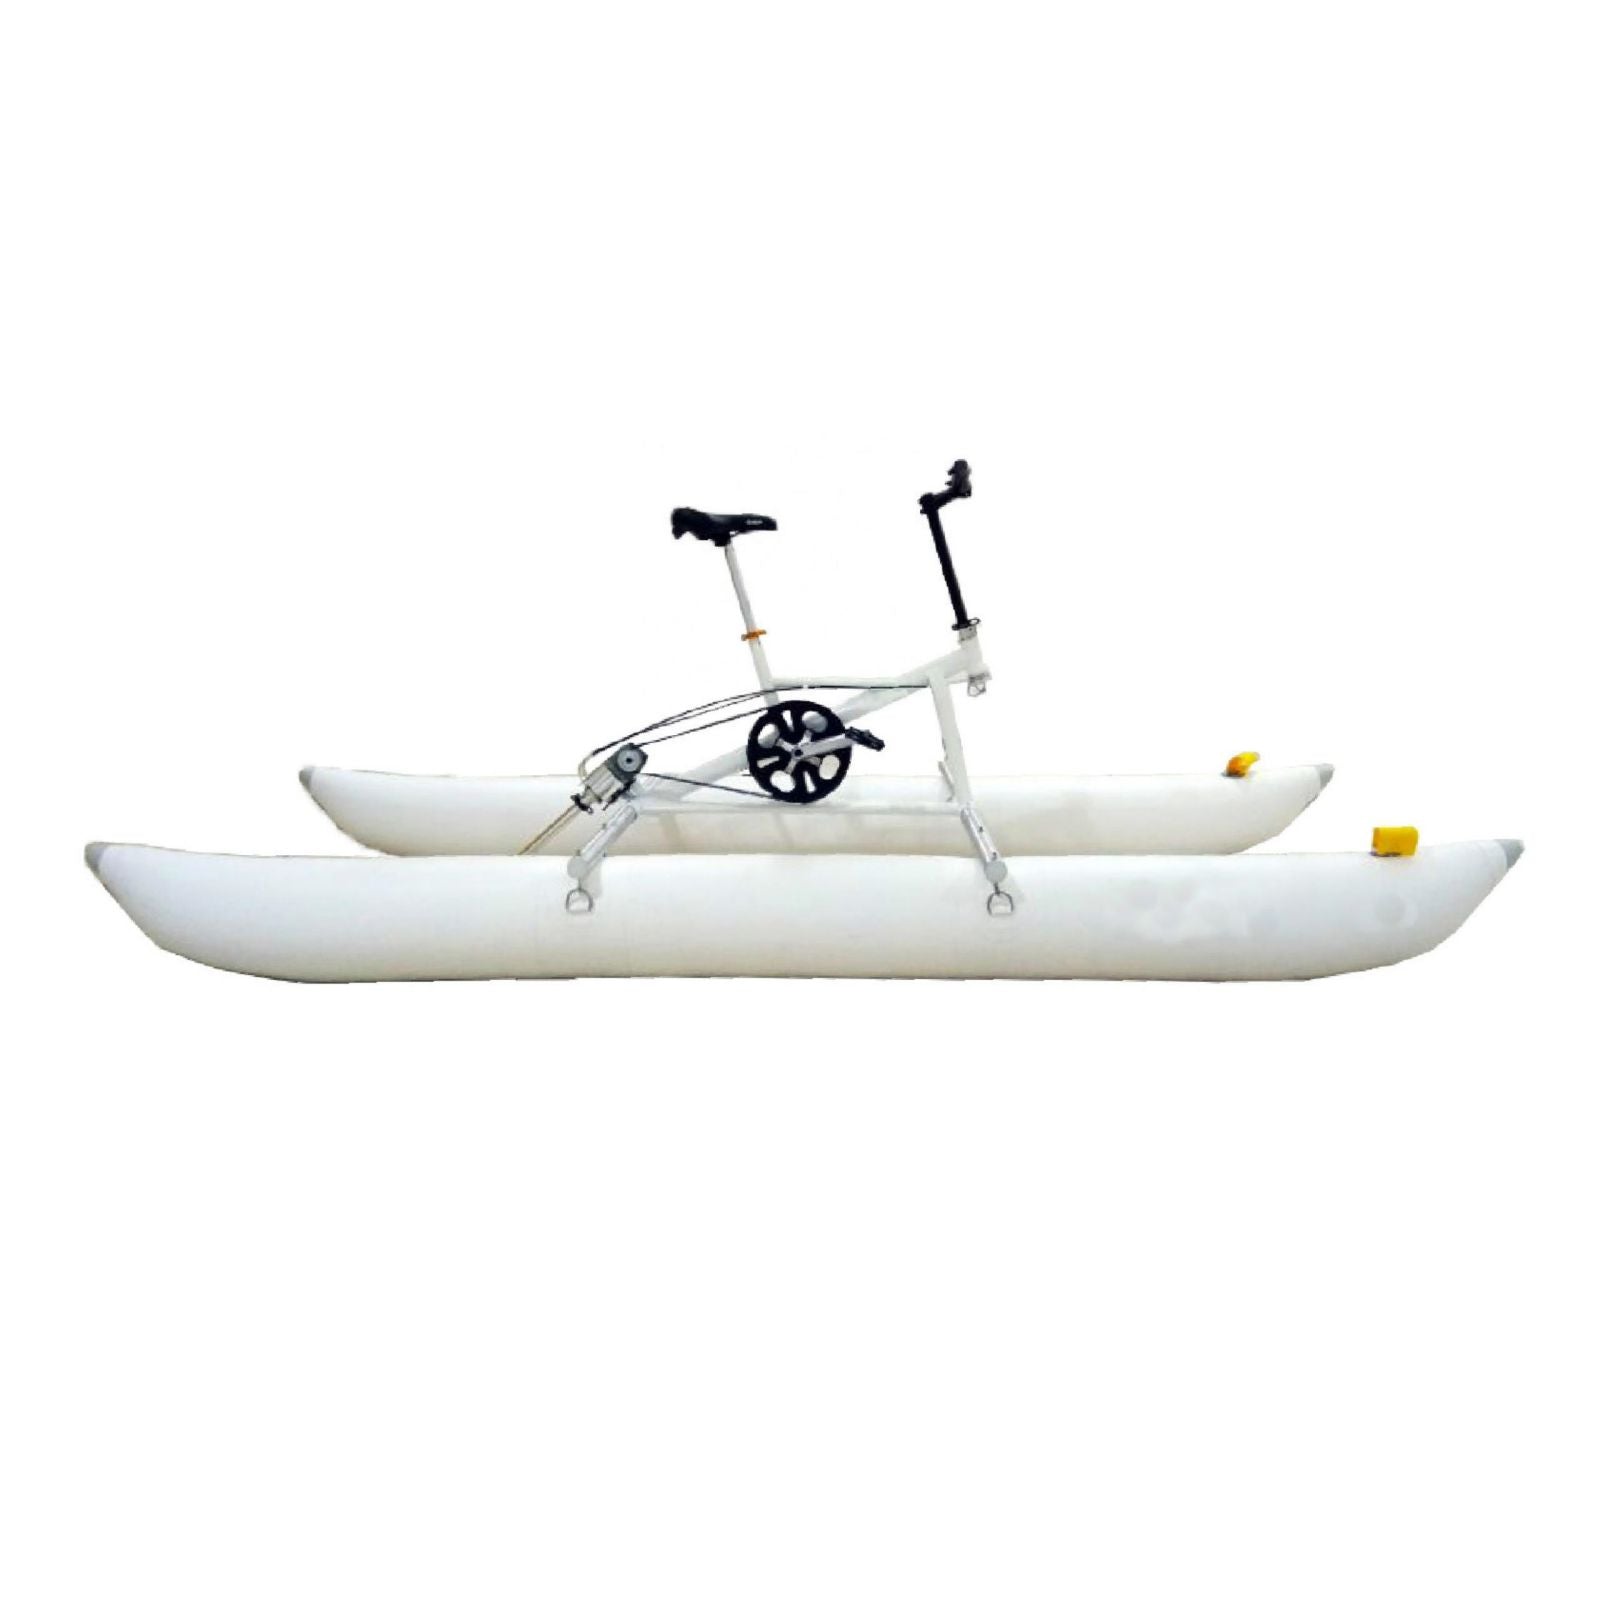 Inflatable Water Bike For Water Sport Portable Yacht Kayak Boatbike - SILBERSHELL